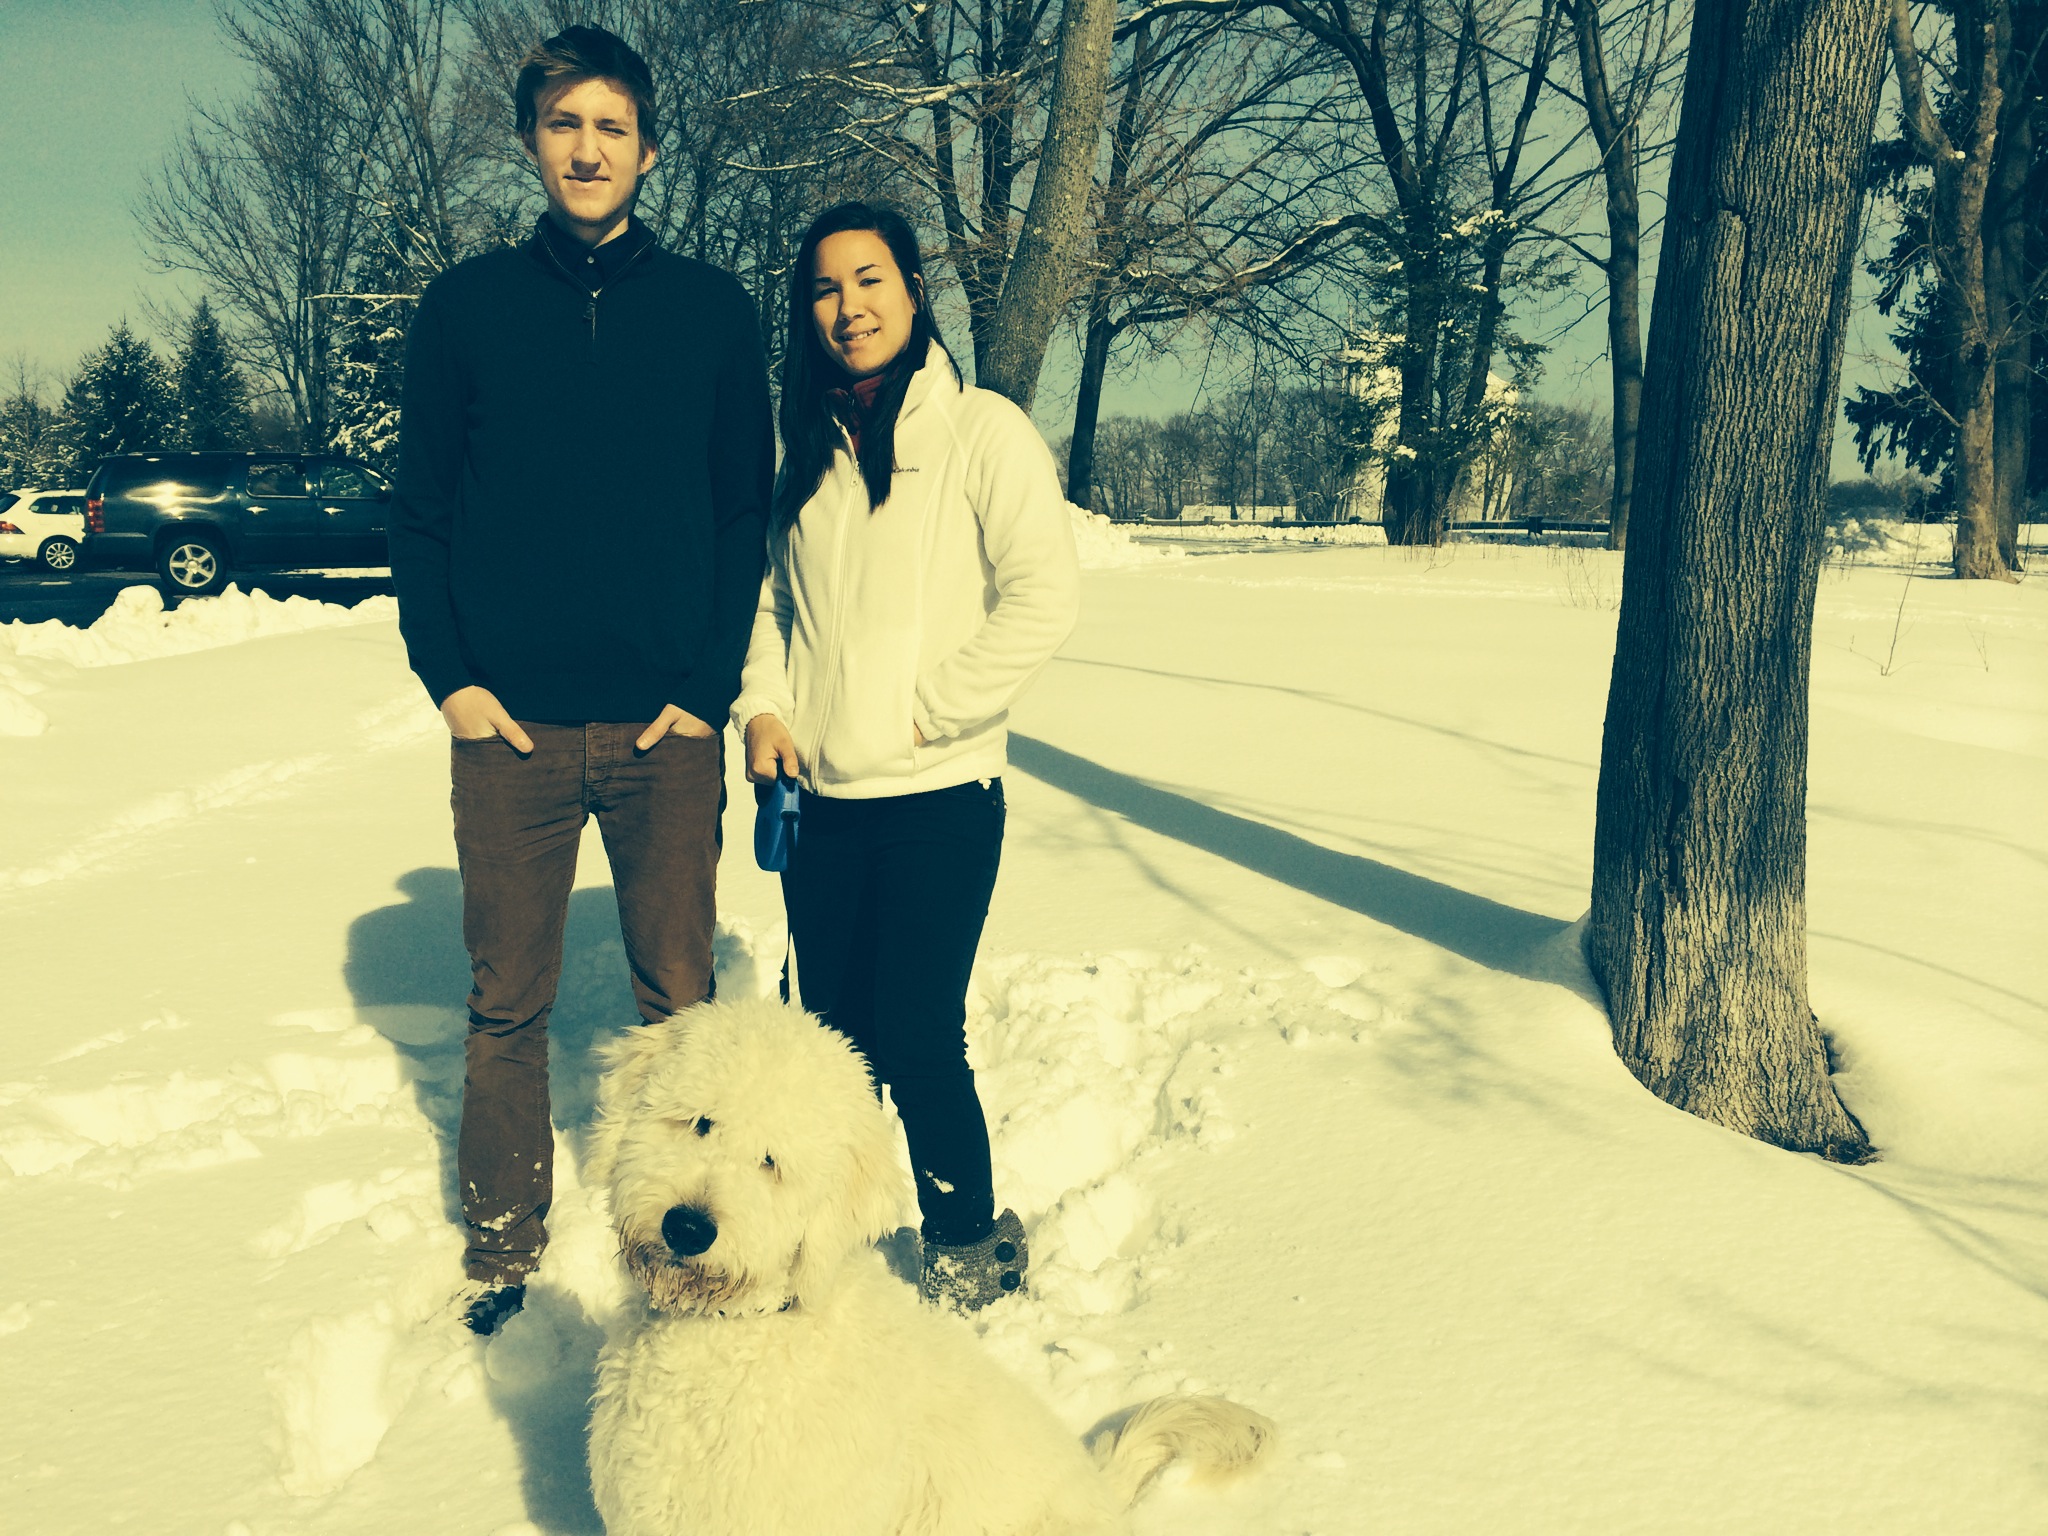 William and Kiana arrive at Spencer's Run on Feb. 4 with 8-month-old Claus, a Golden-Doodle. Credit: Michael Dinan